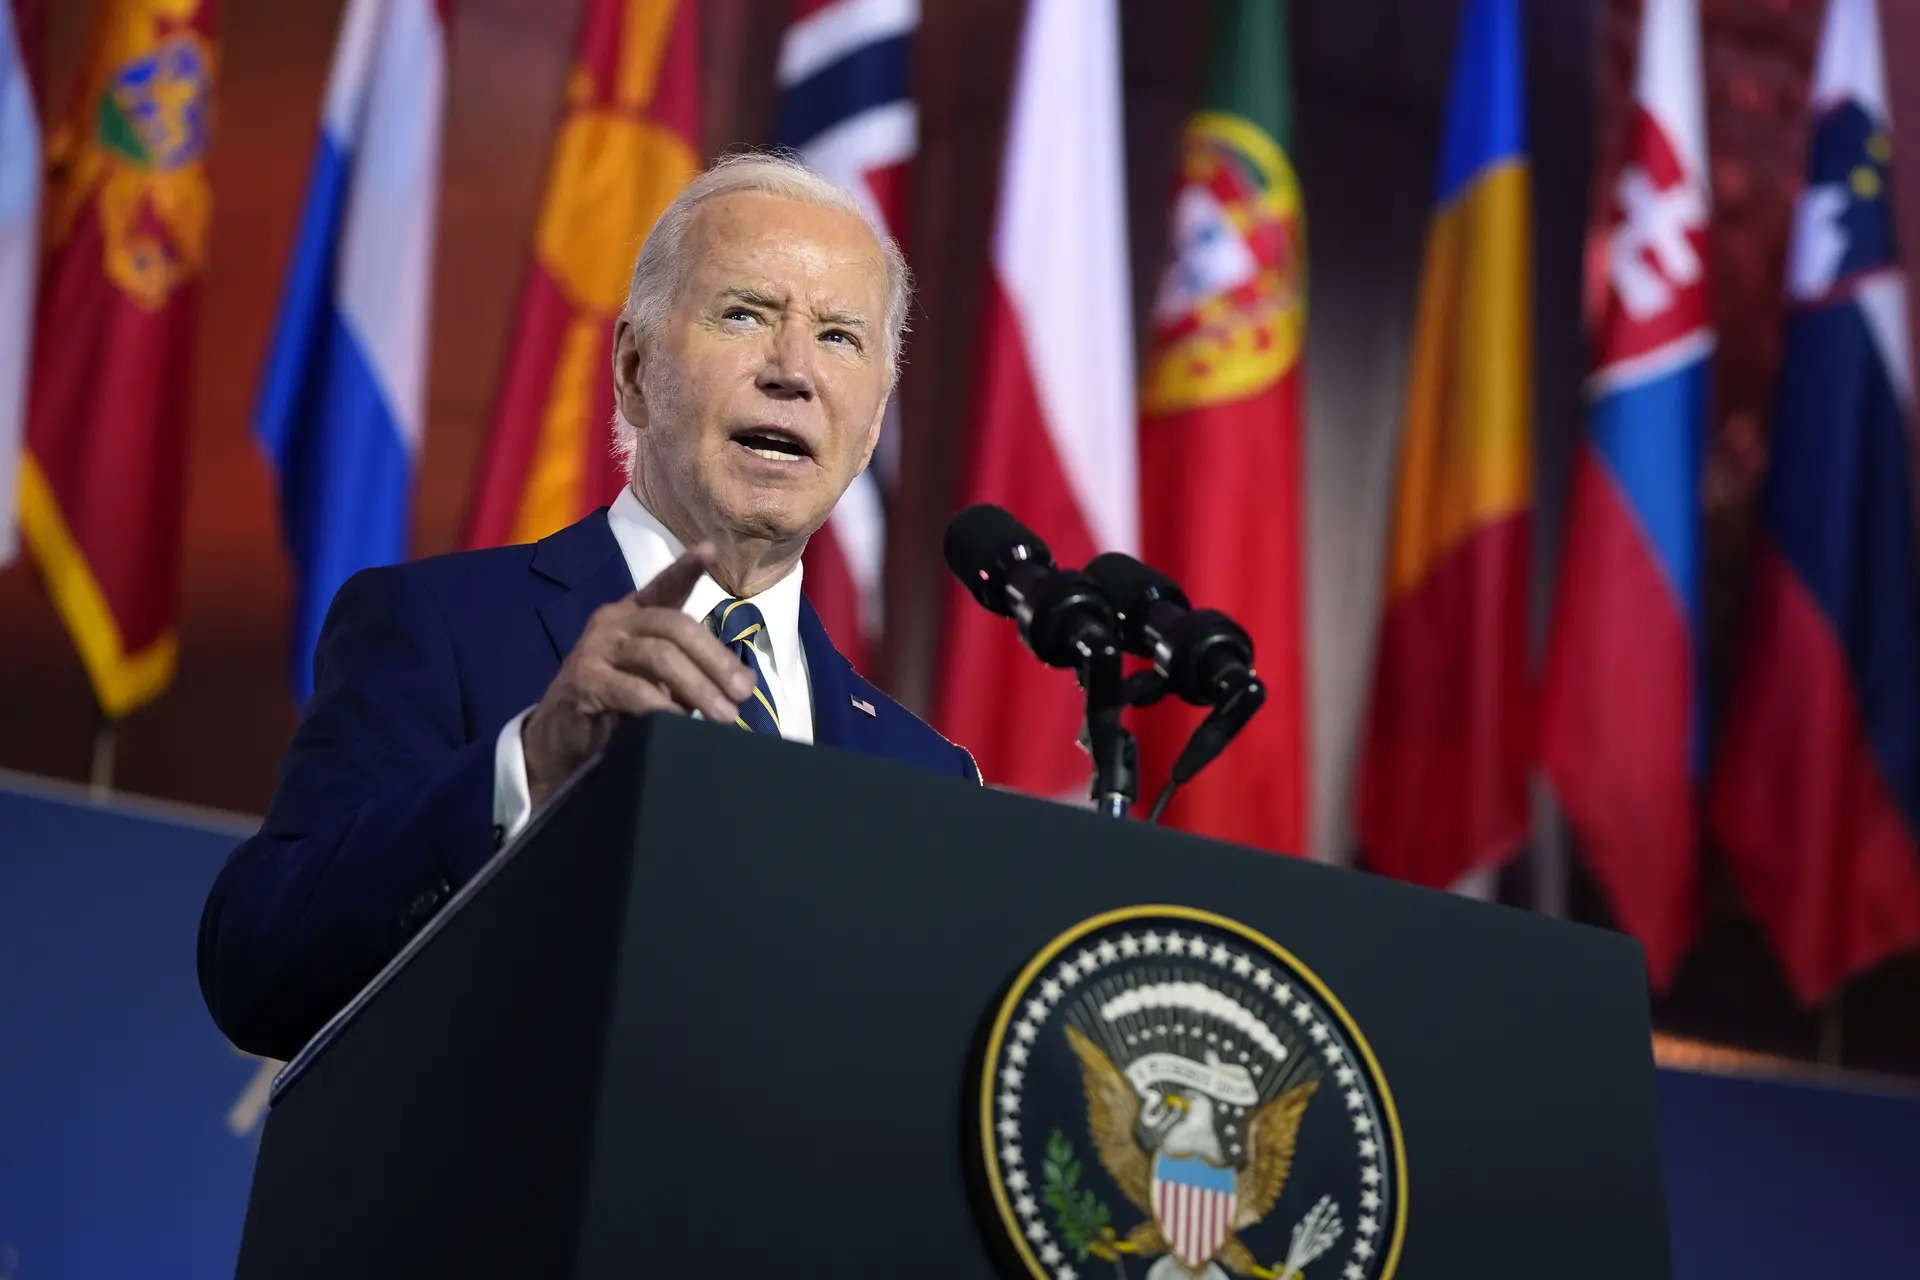 Can Joe Biden serve another term? News anchor who interviewed him says “I don’t think so” 